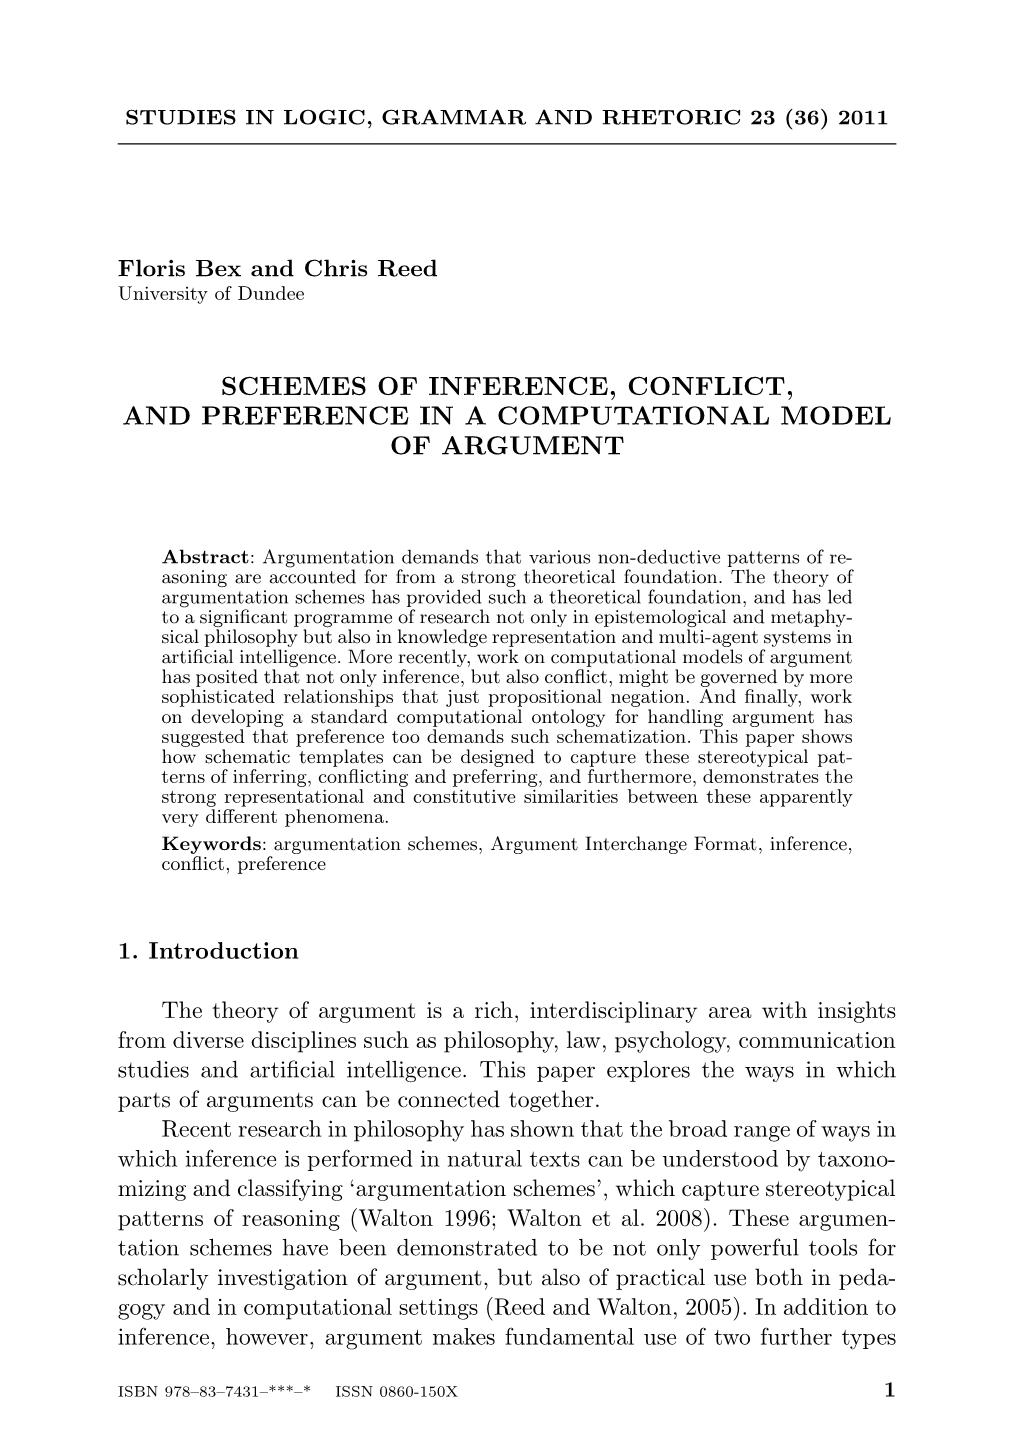 Schemes of Inference, Conflict, and Preference in a Computational Model of Argument